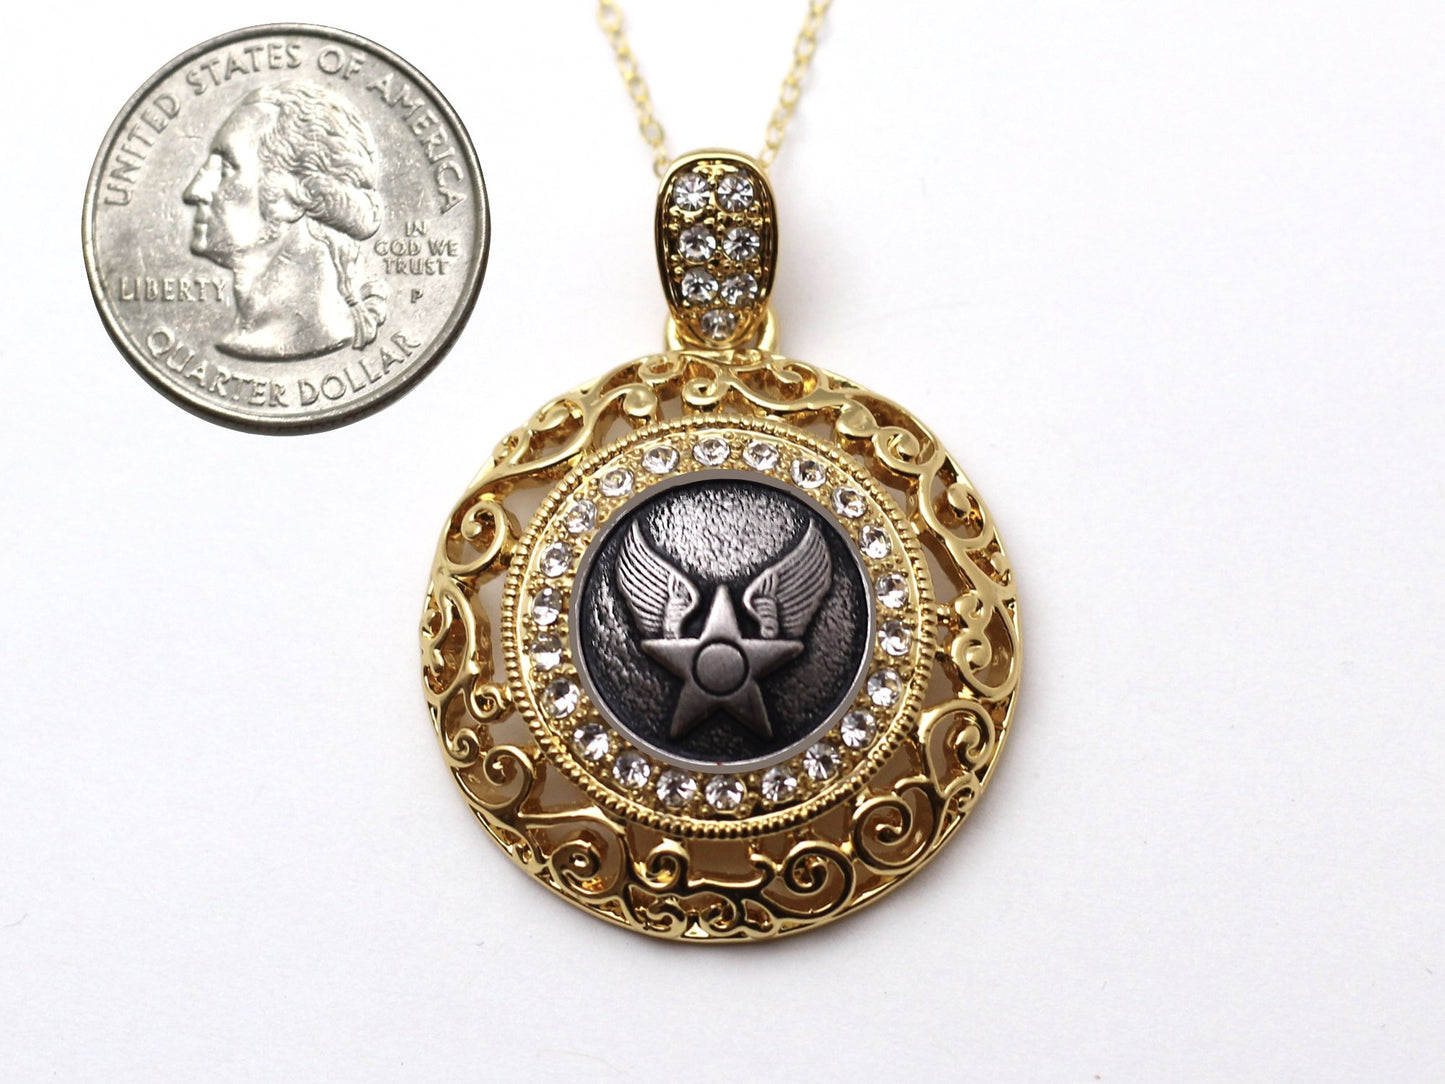 Legacy Collection | Button Necklace - Large Gold Rhinestone Pendant